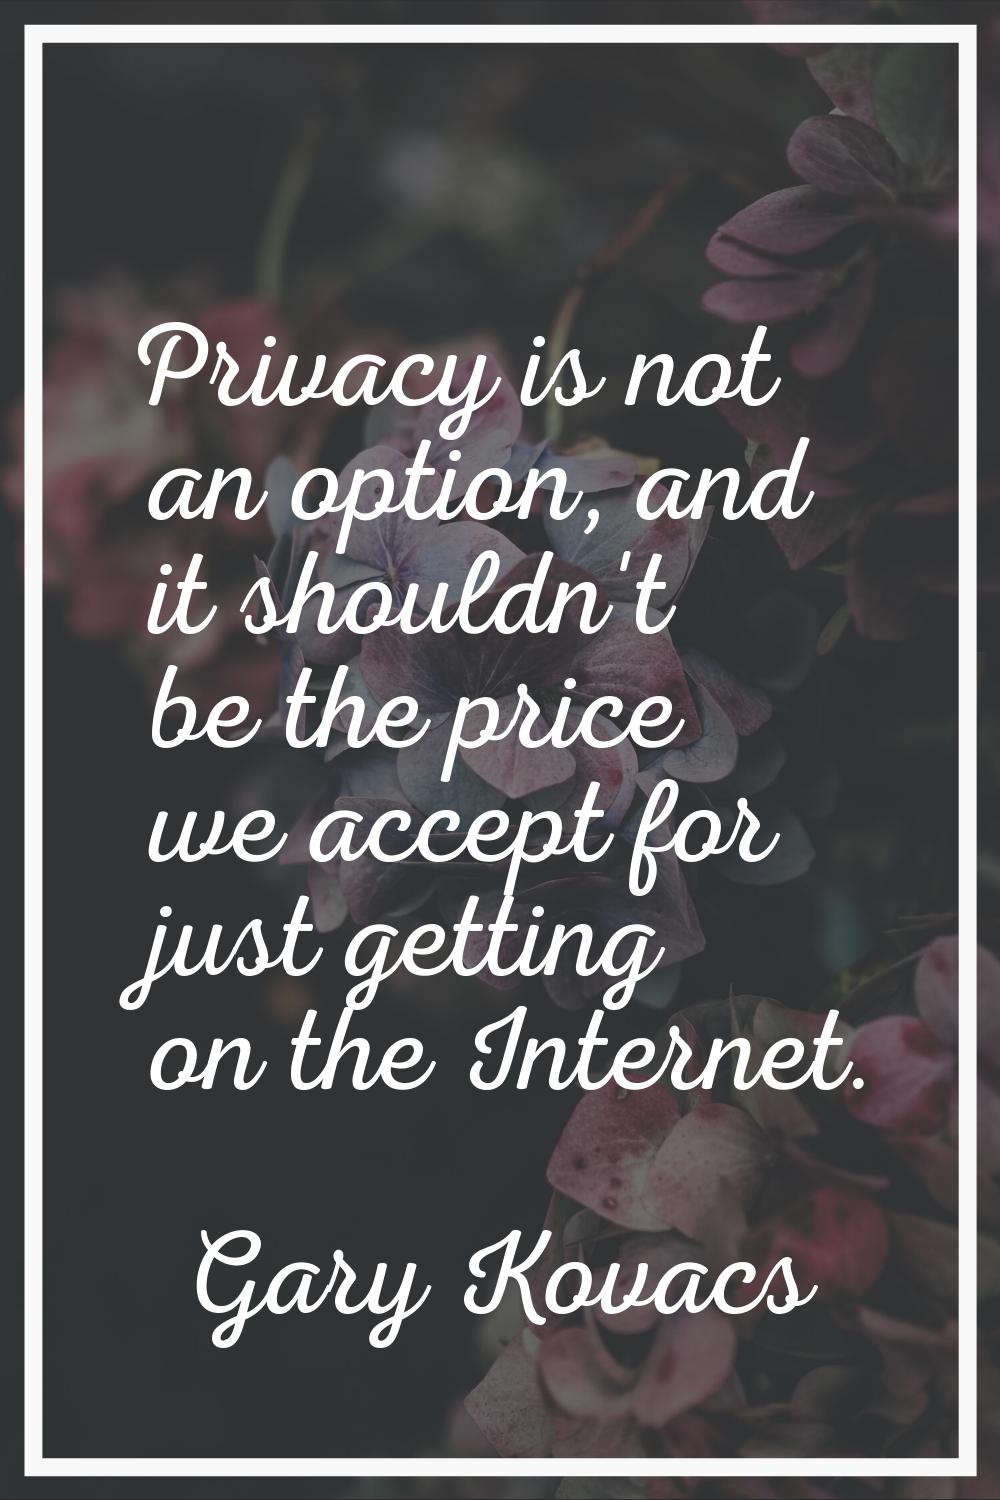 Privacy is not an option, and it shouldn't be the price we accept for just getting on the Internet.